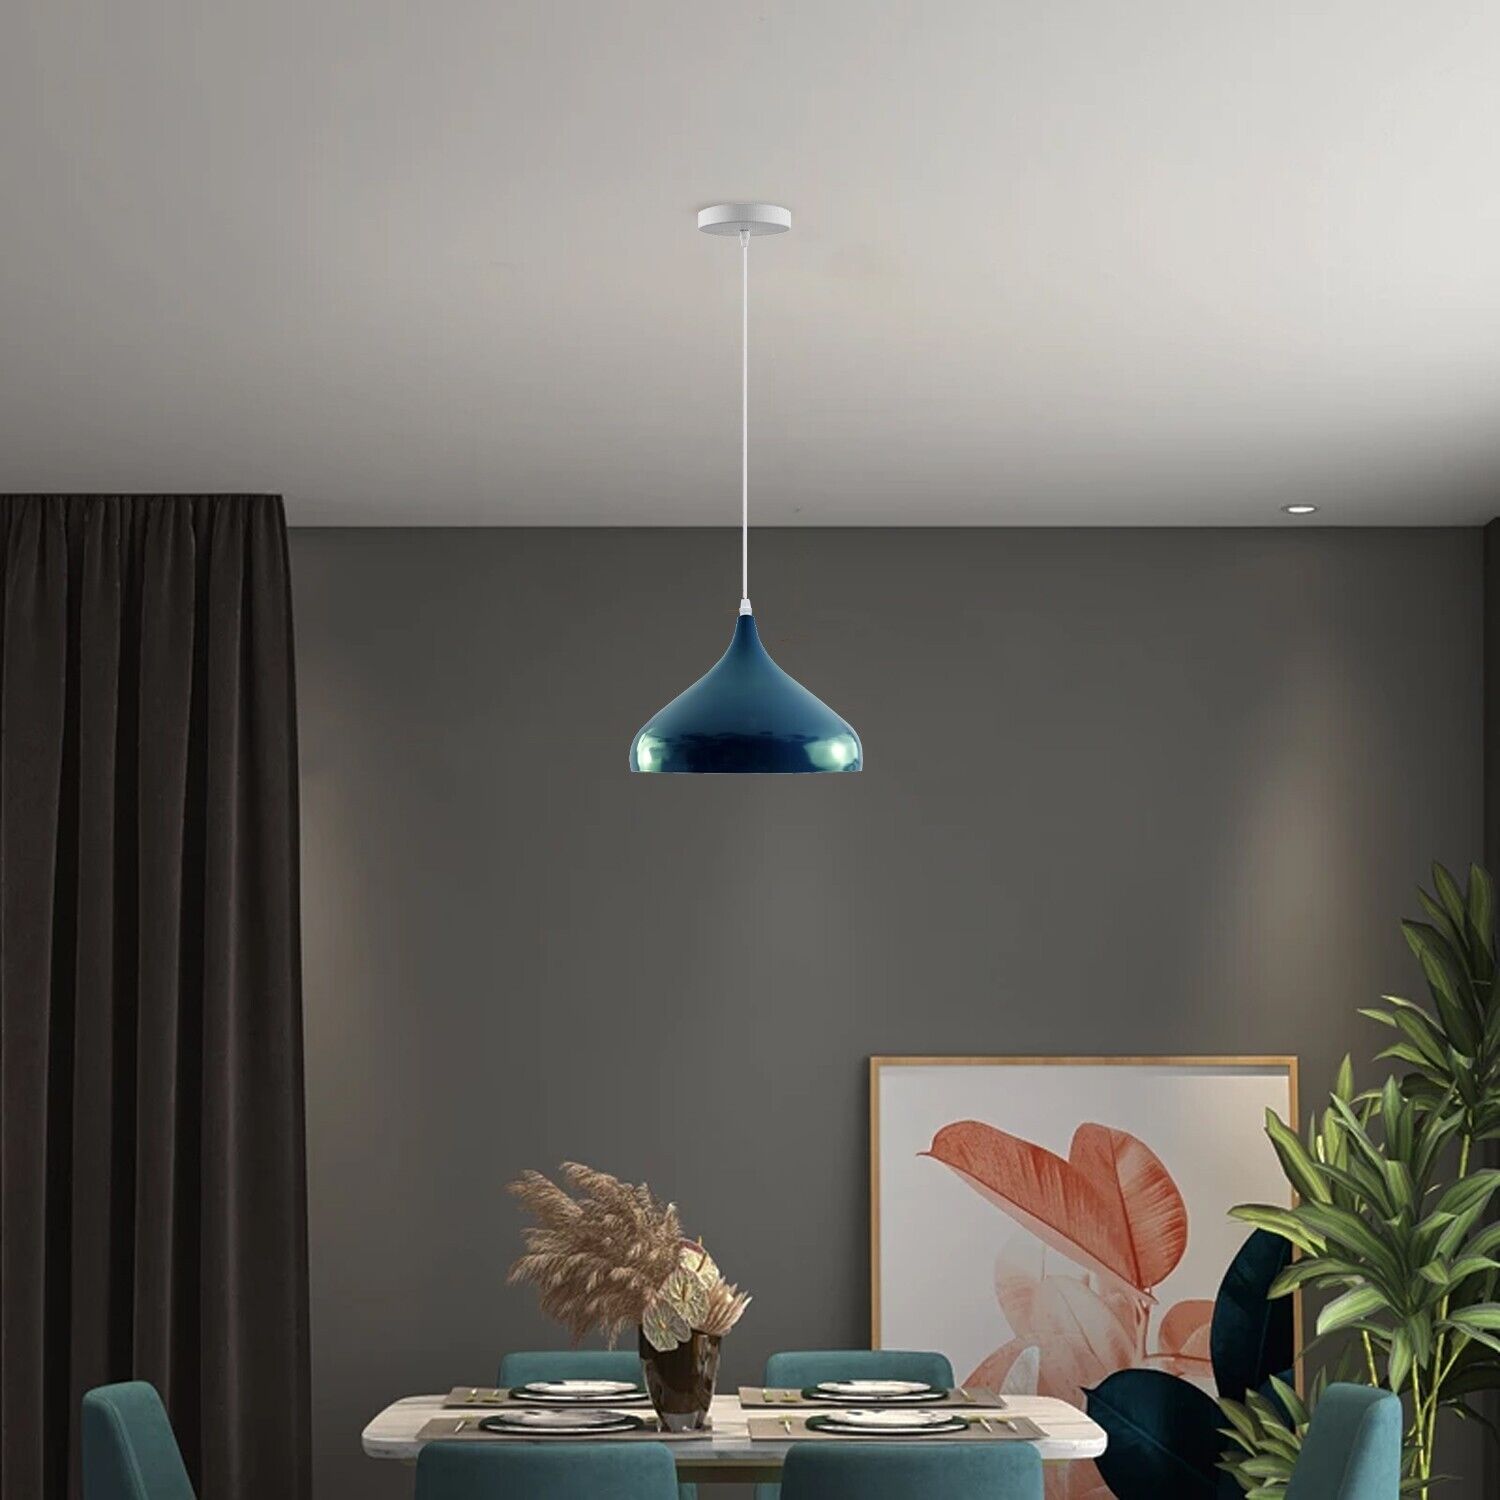 Teal Cyan Blue Ceiling Pendant Shade over the dinning table